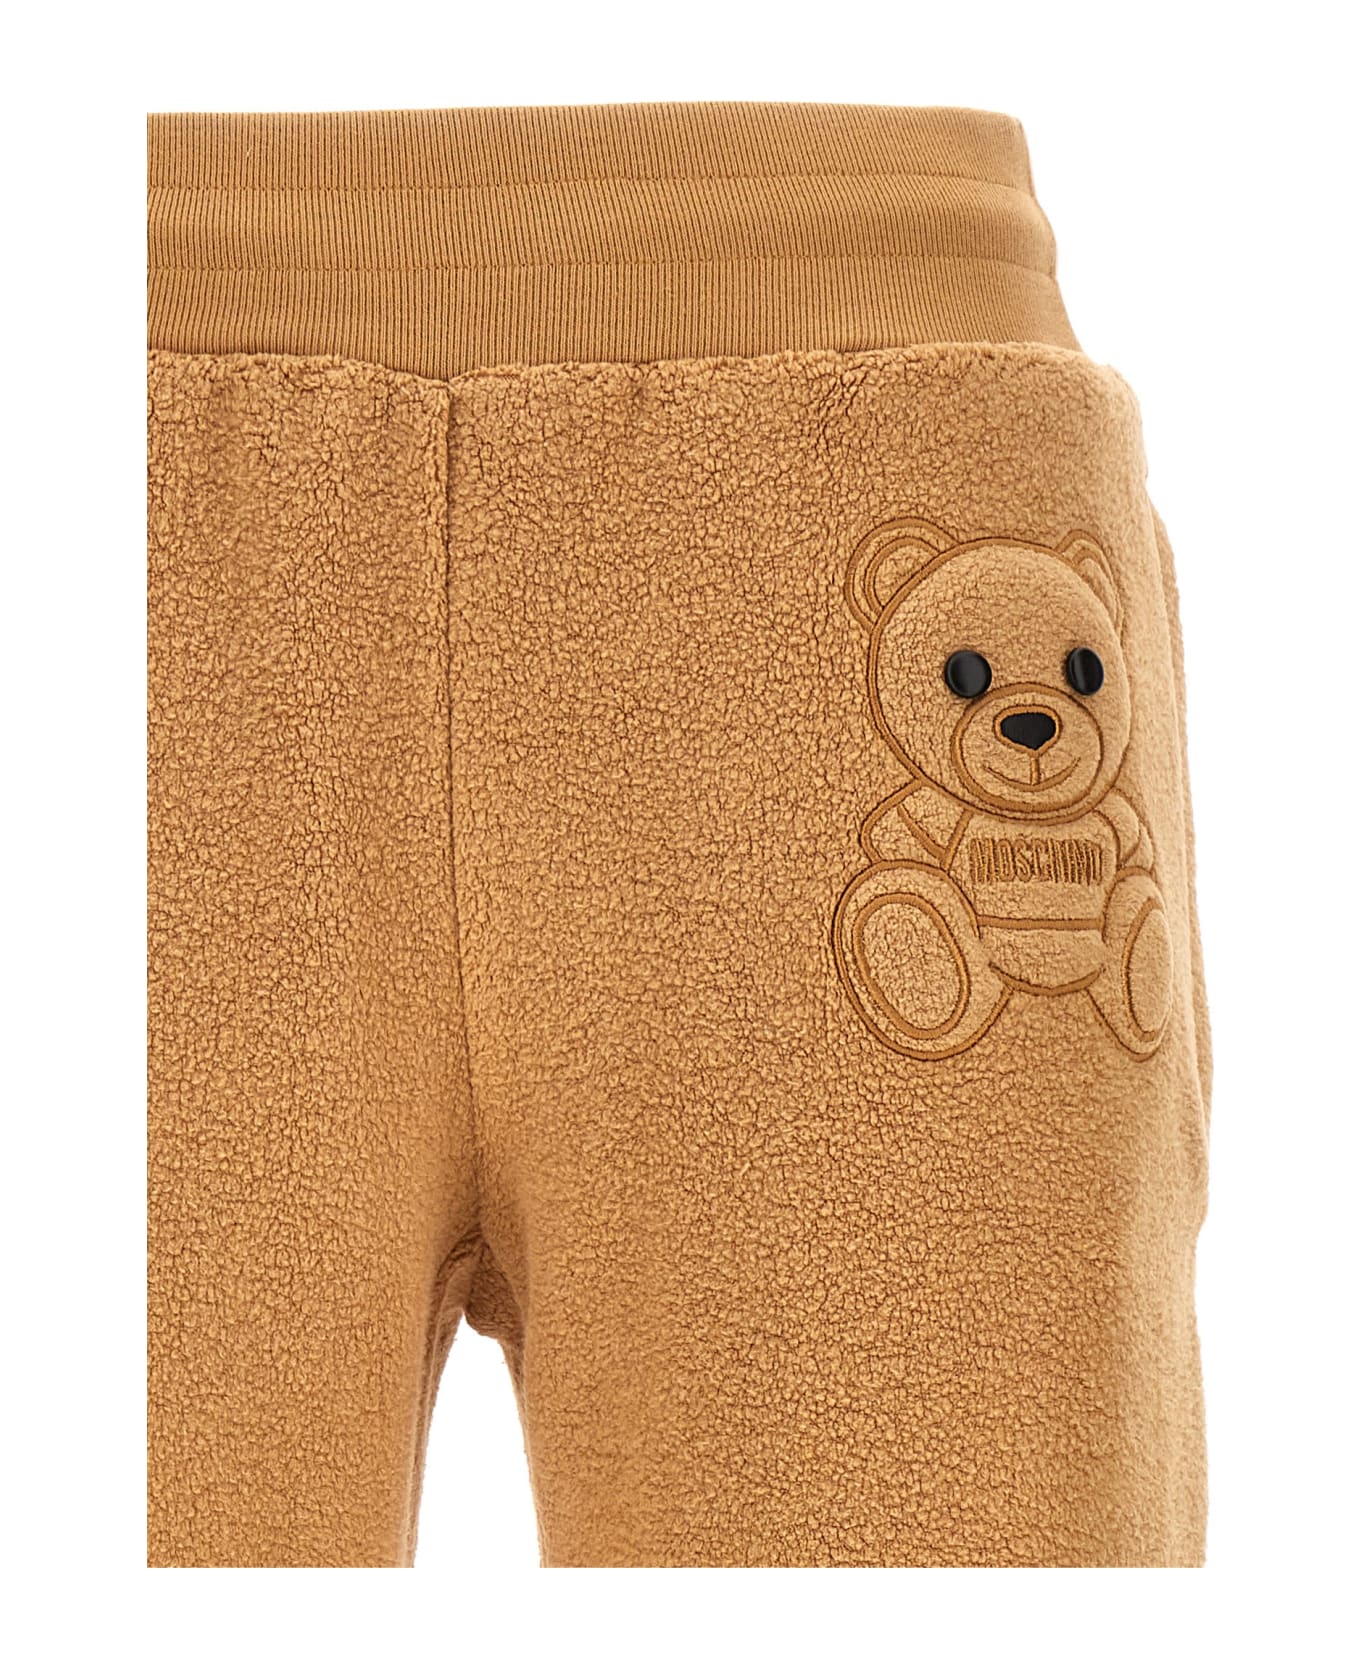 Moschino 'orsetto' Joggers - Beige ボトムス